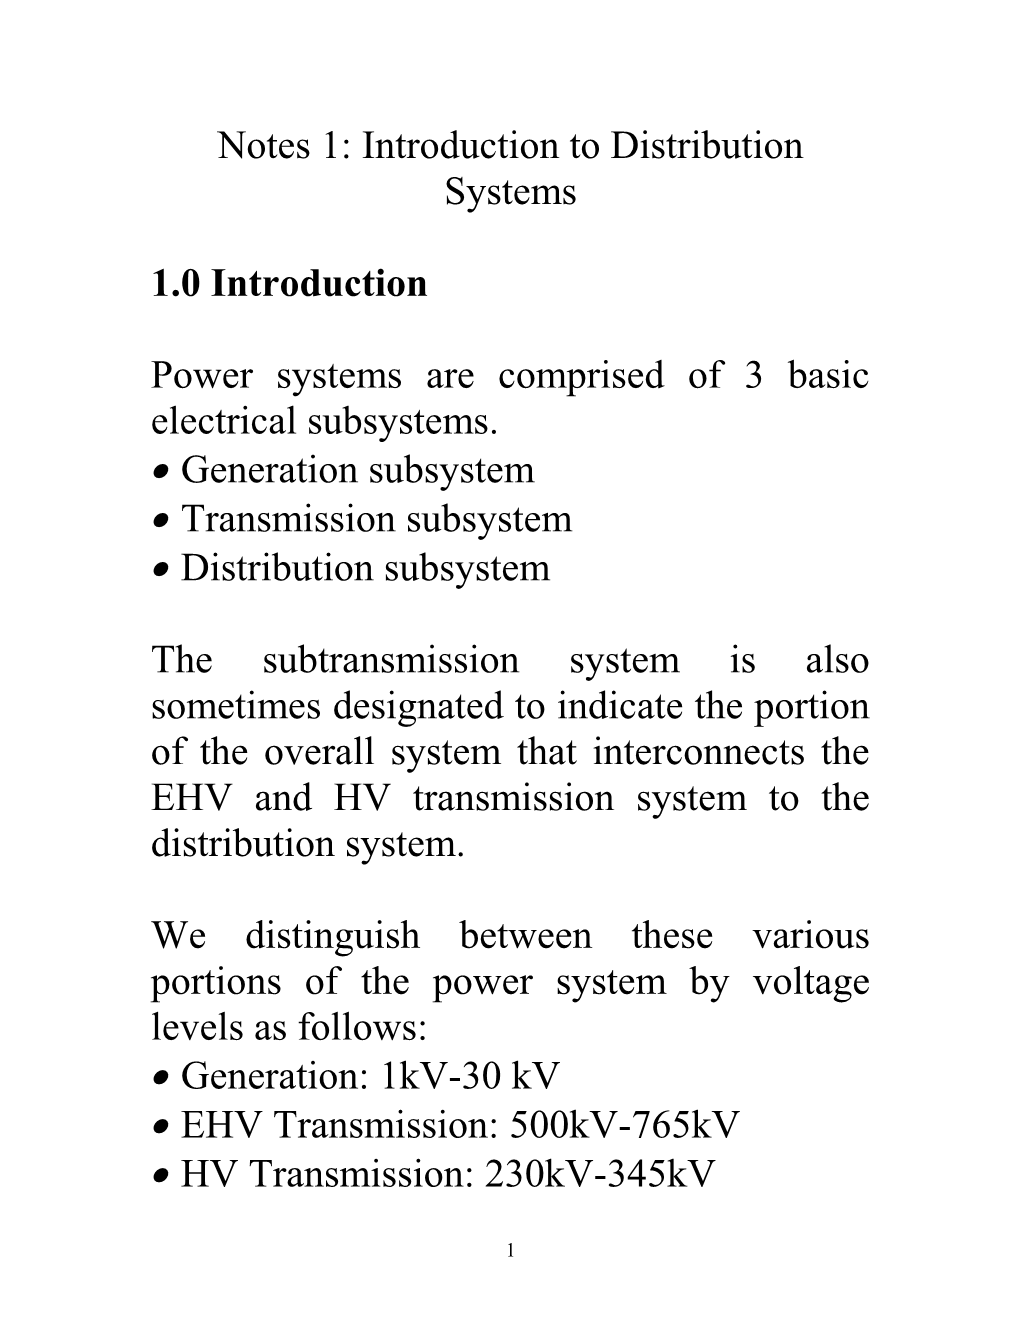 Introduction to Distribution Systems